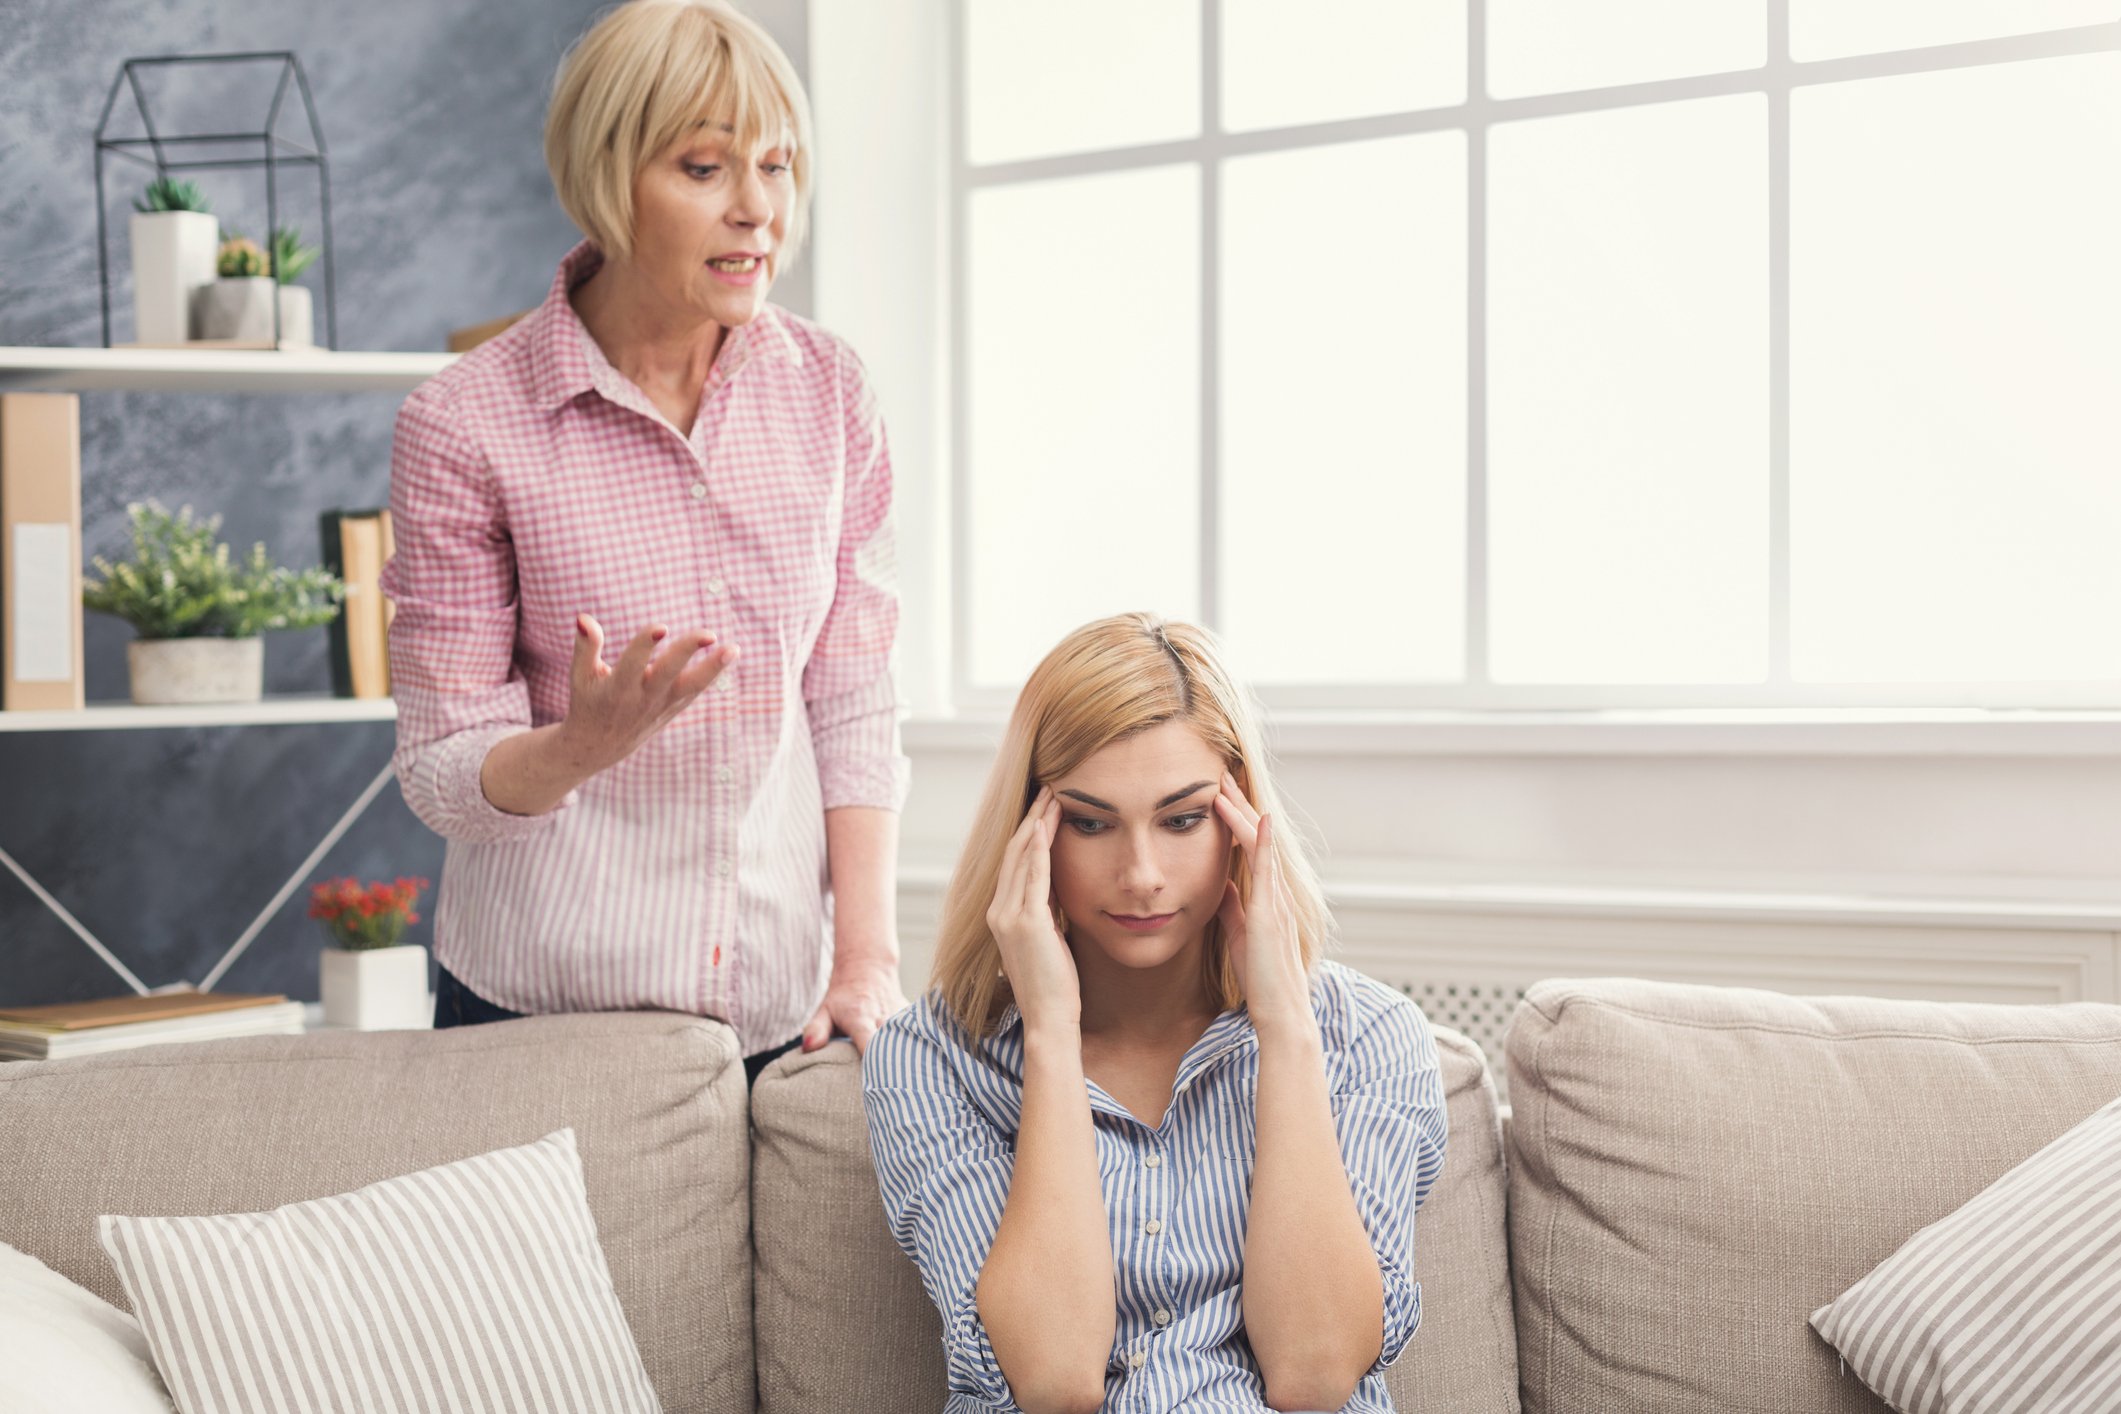 Daughter is annoyed by her mother | Photo: Getty Images